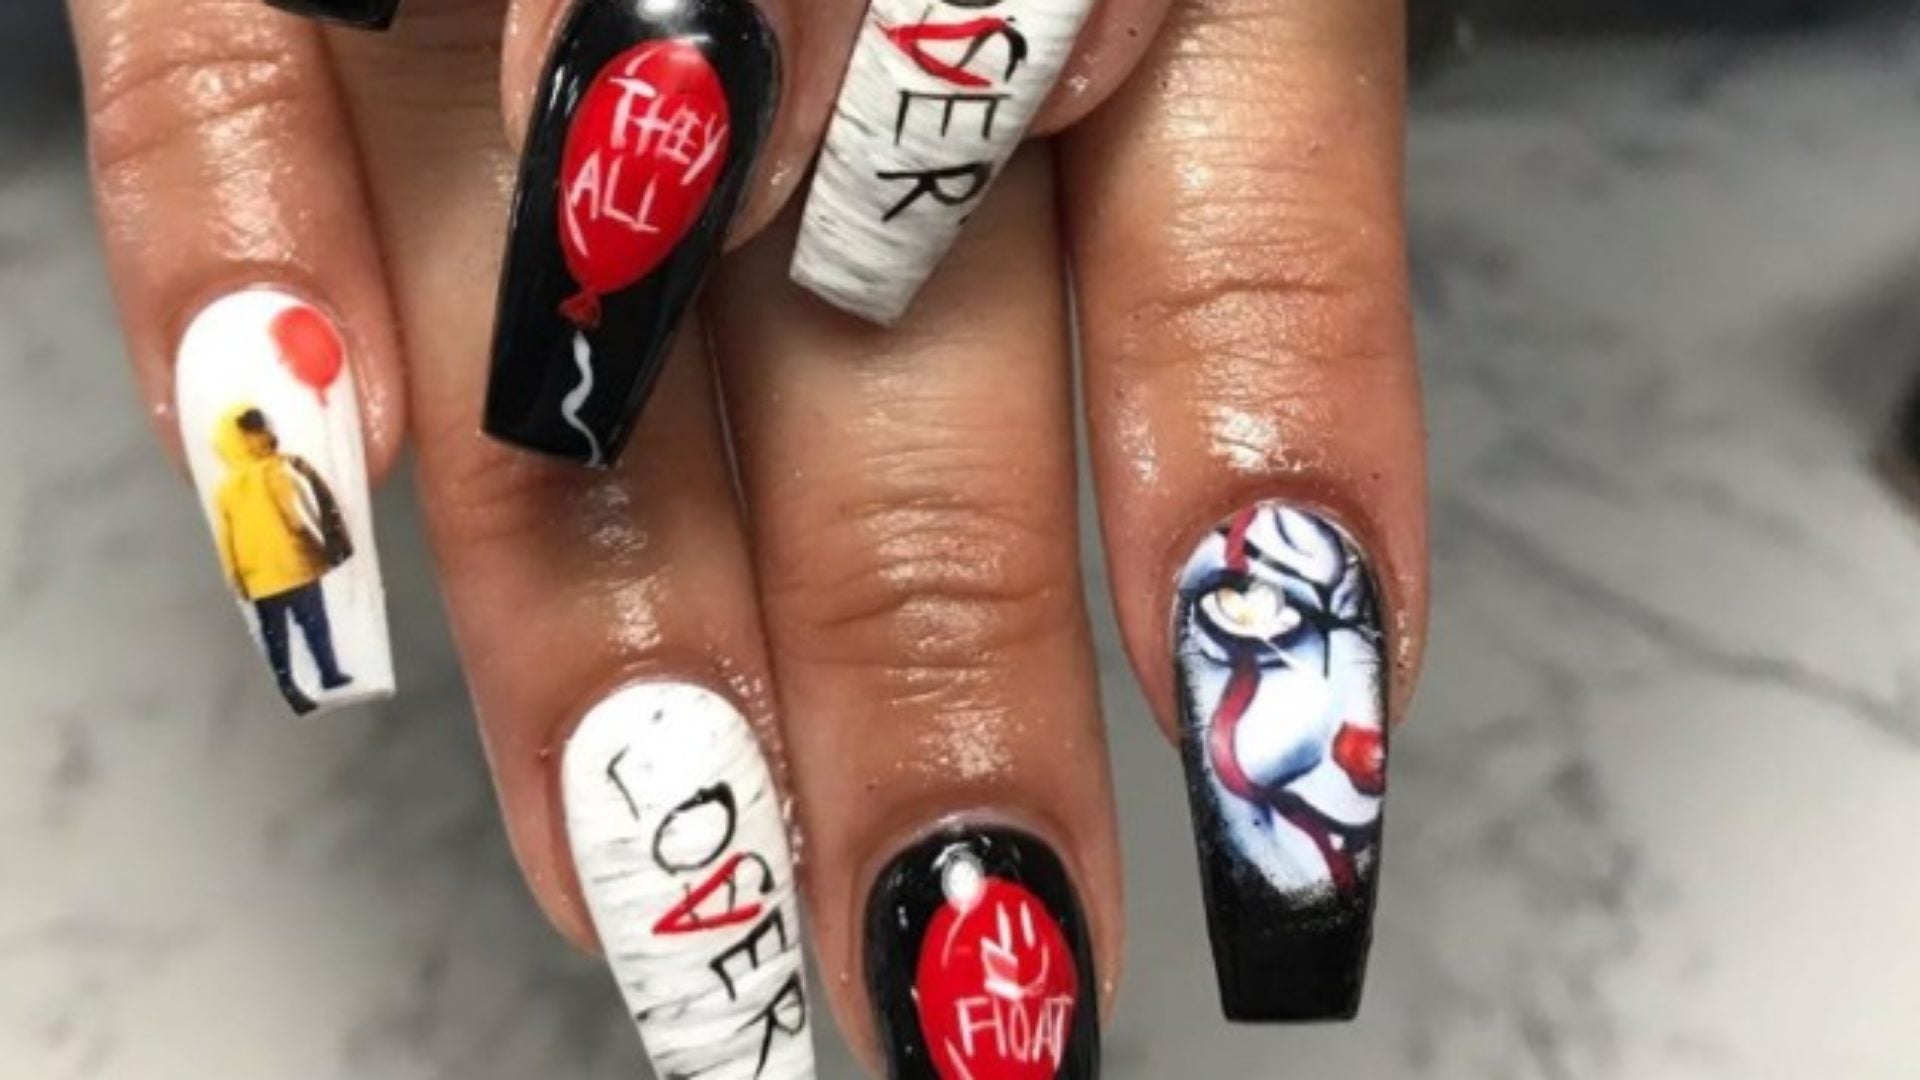 15 Spooky Inspired Nails That Are Making Us Excited For Halloween